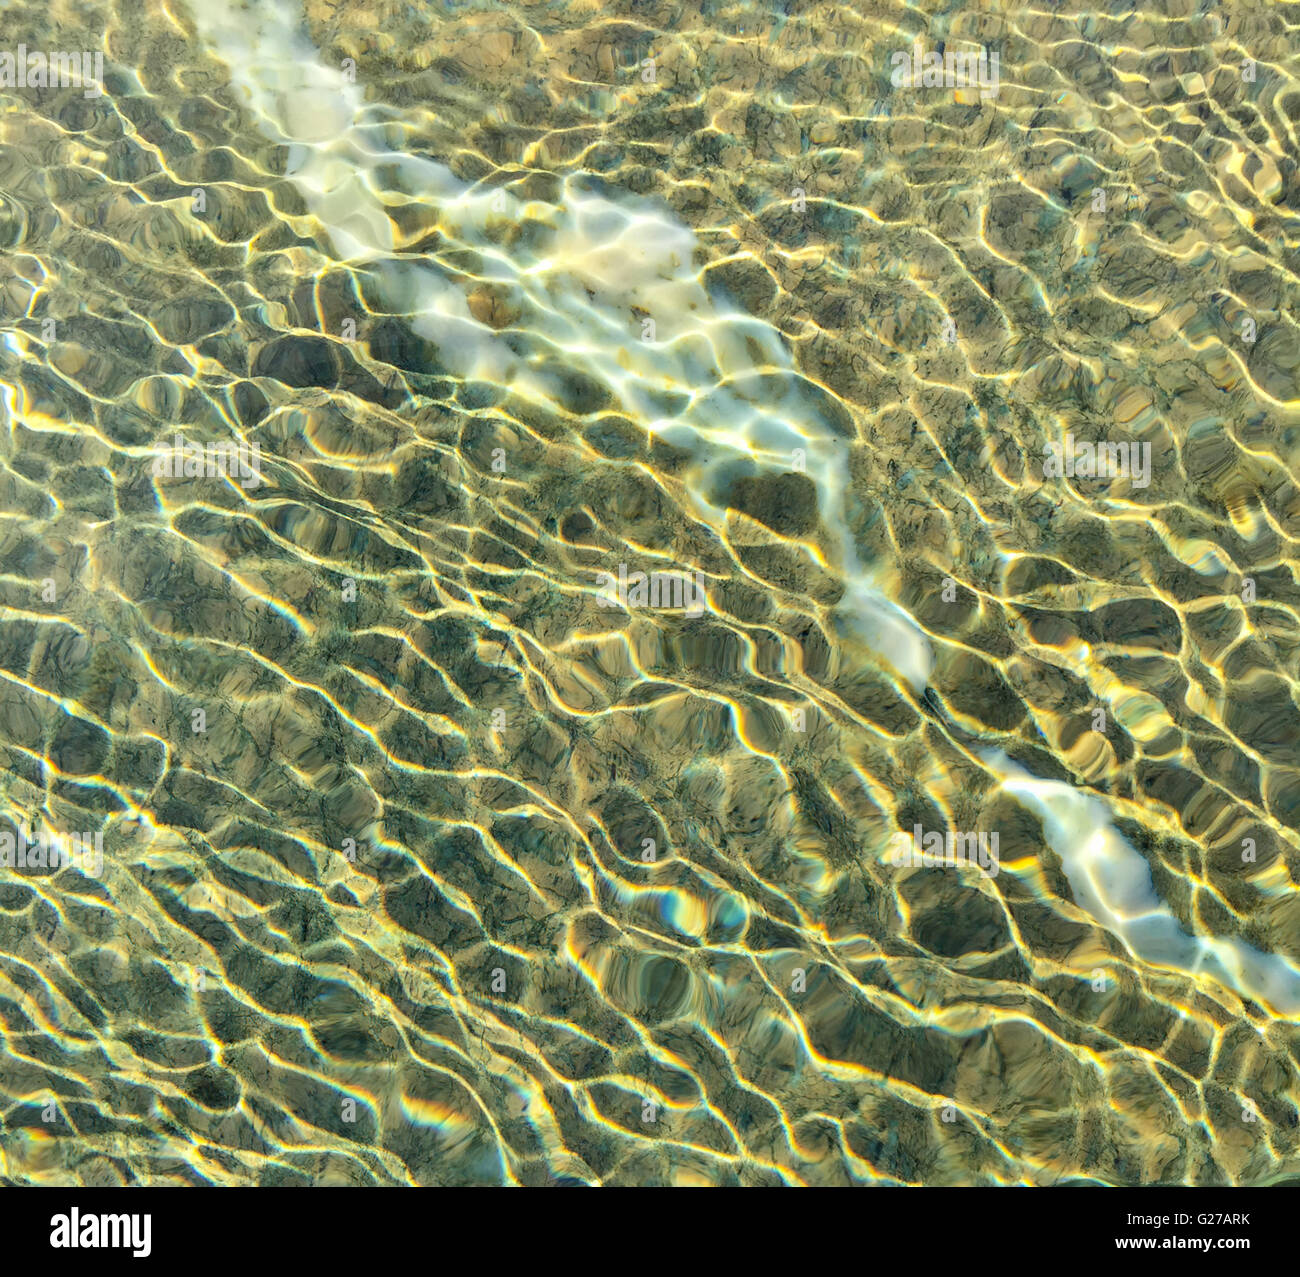 detail image of water floating in a pool in Greece Stock Photo